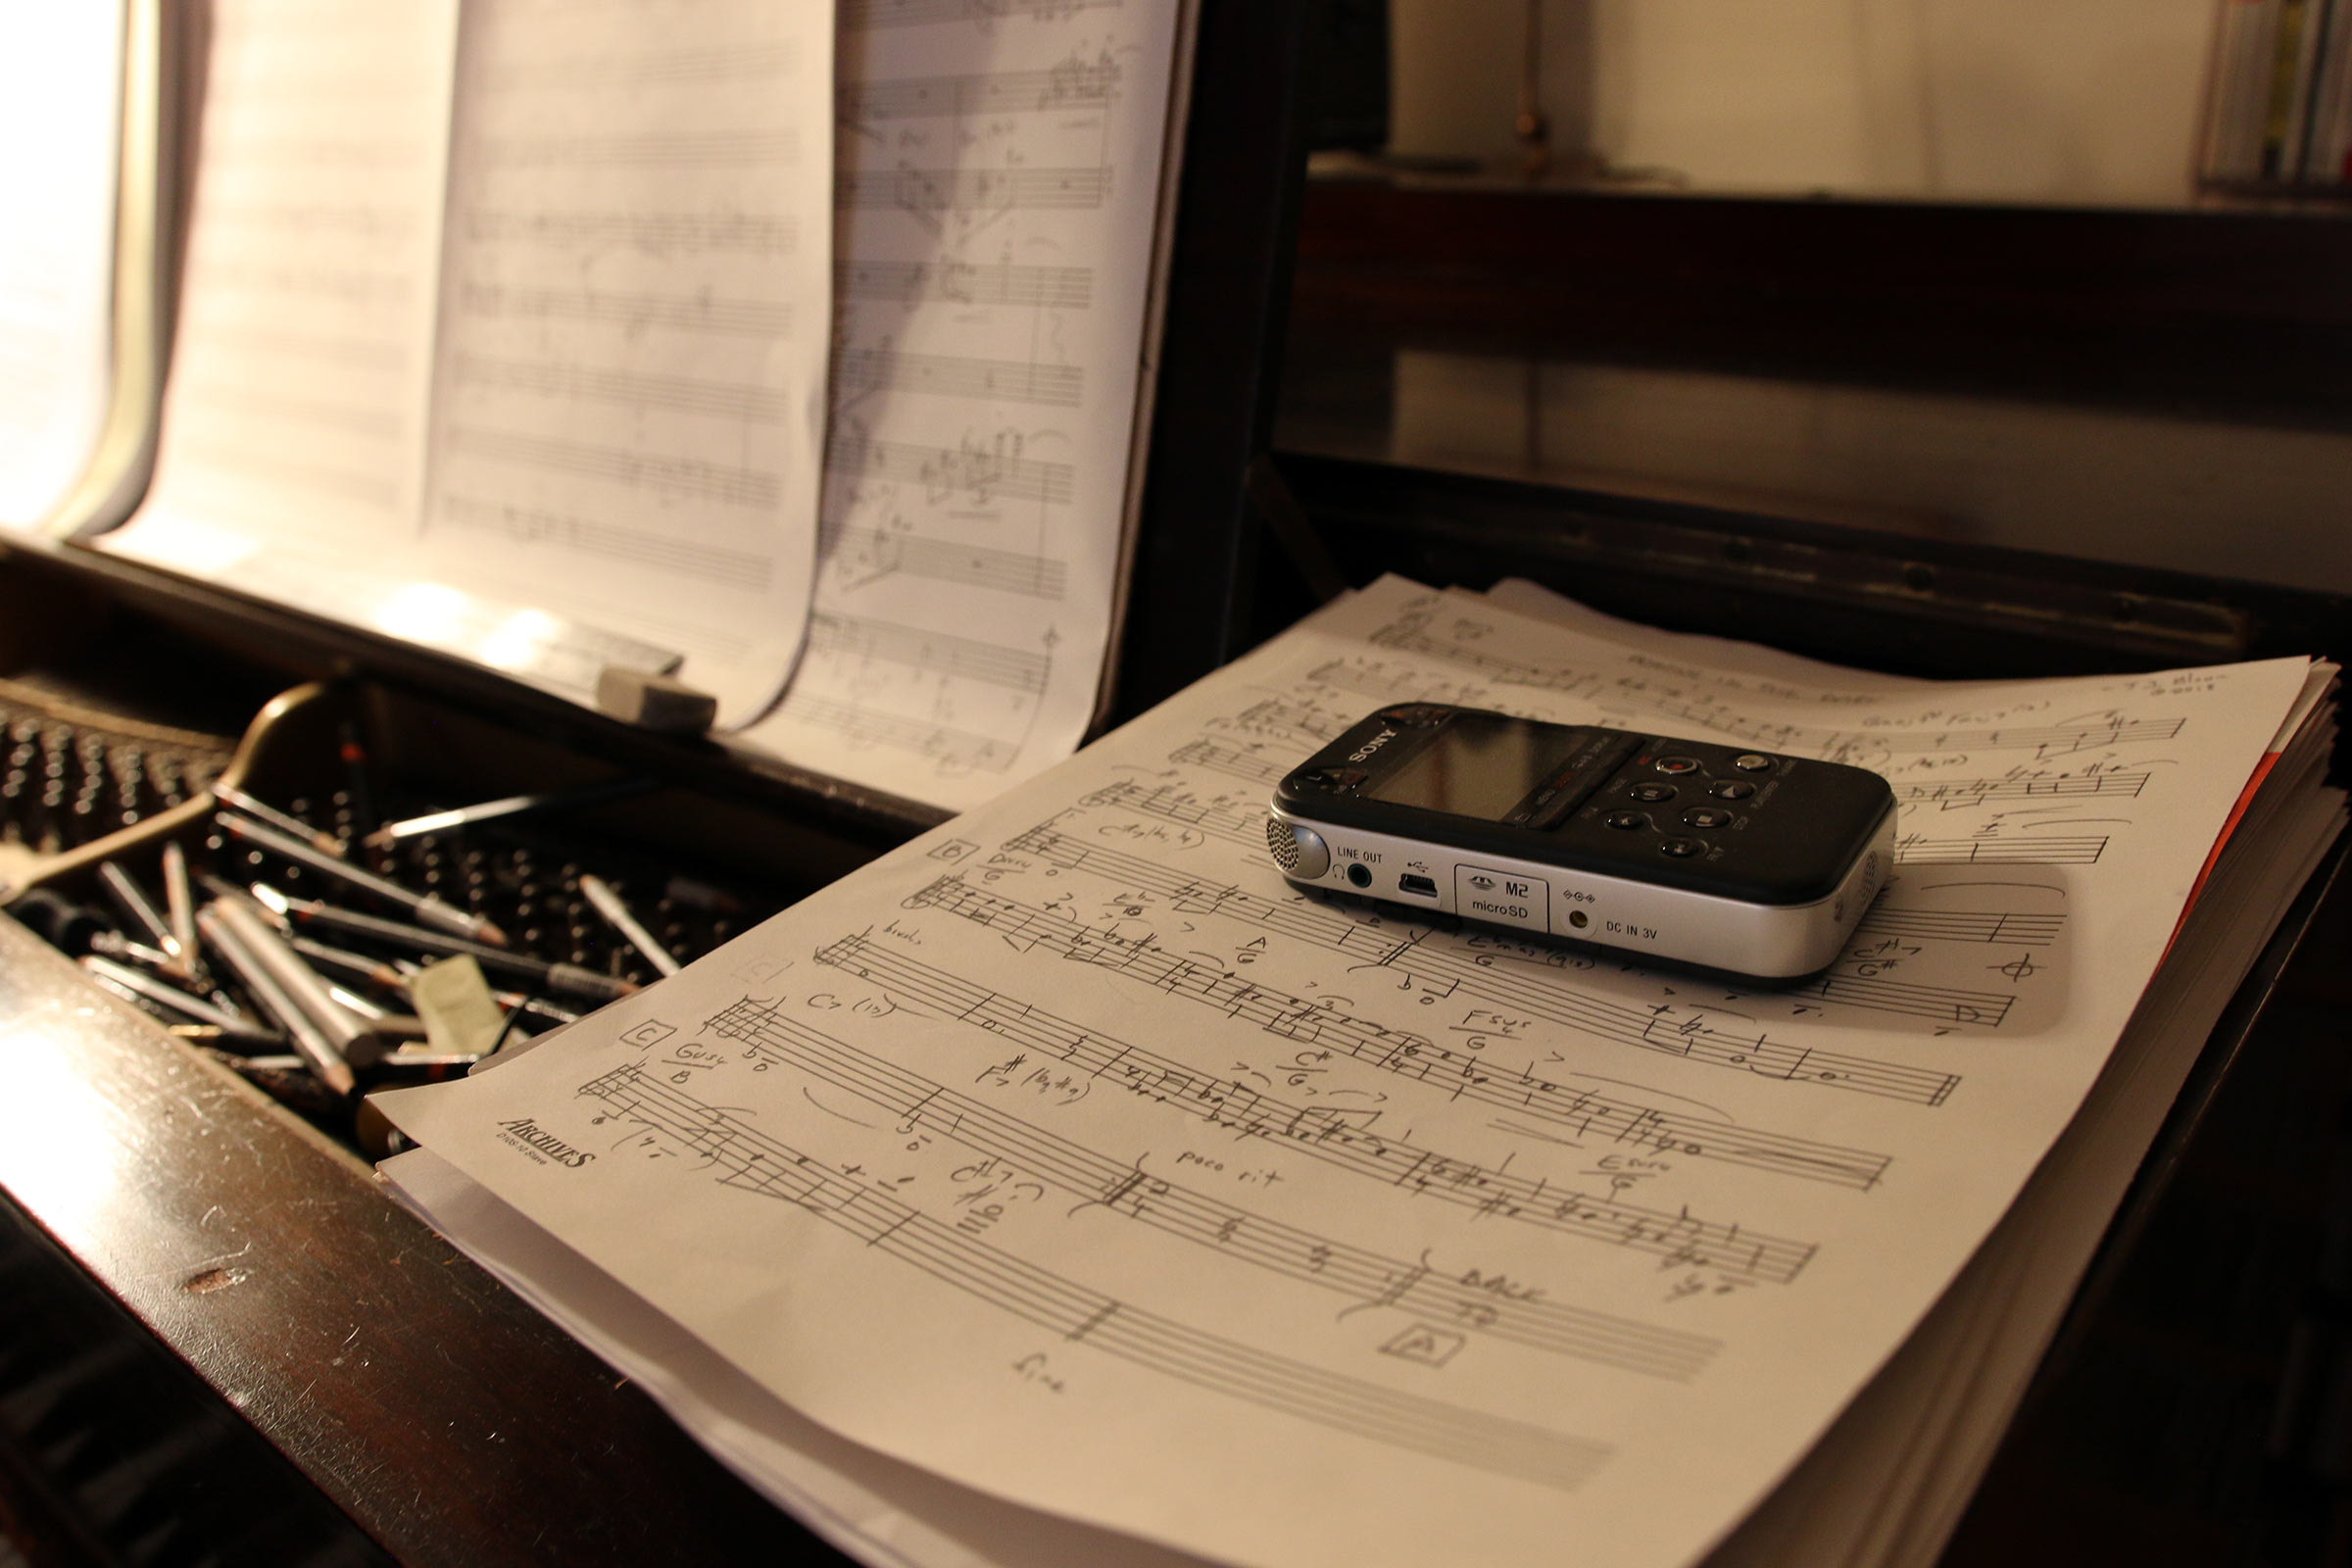 A pocket-sized audio-recorder on a pile of music manuscript paper in one of the corners on the right hand corner of Jane Ira Bloom's grand piano.